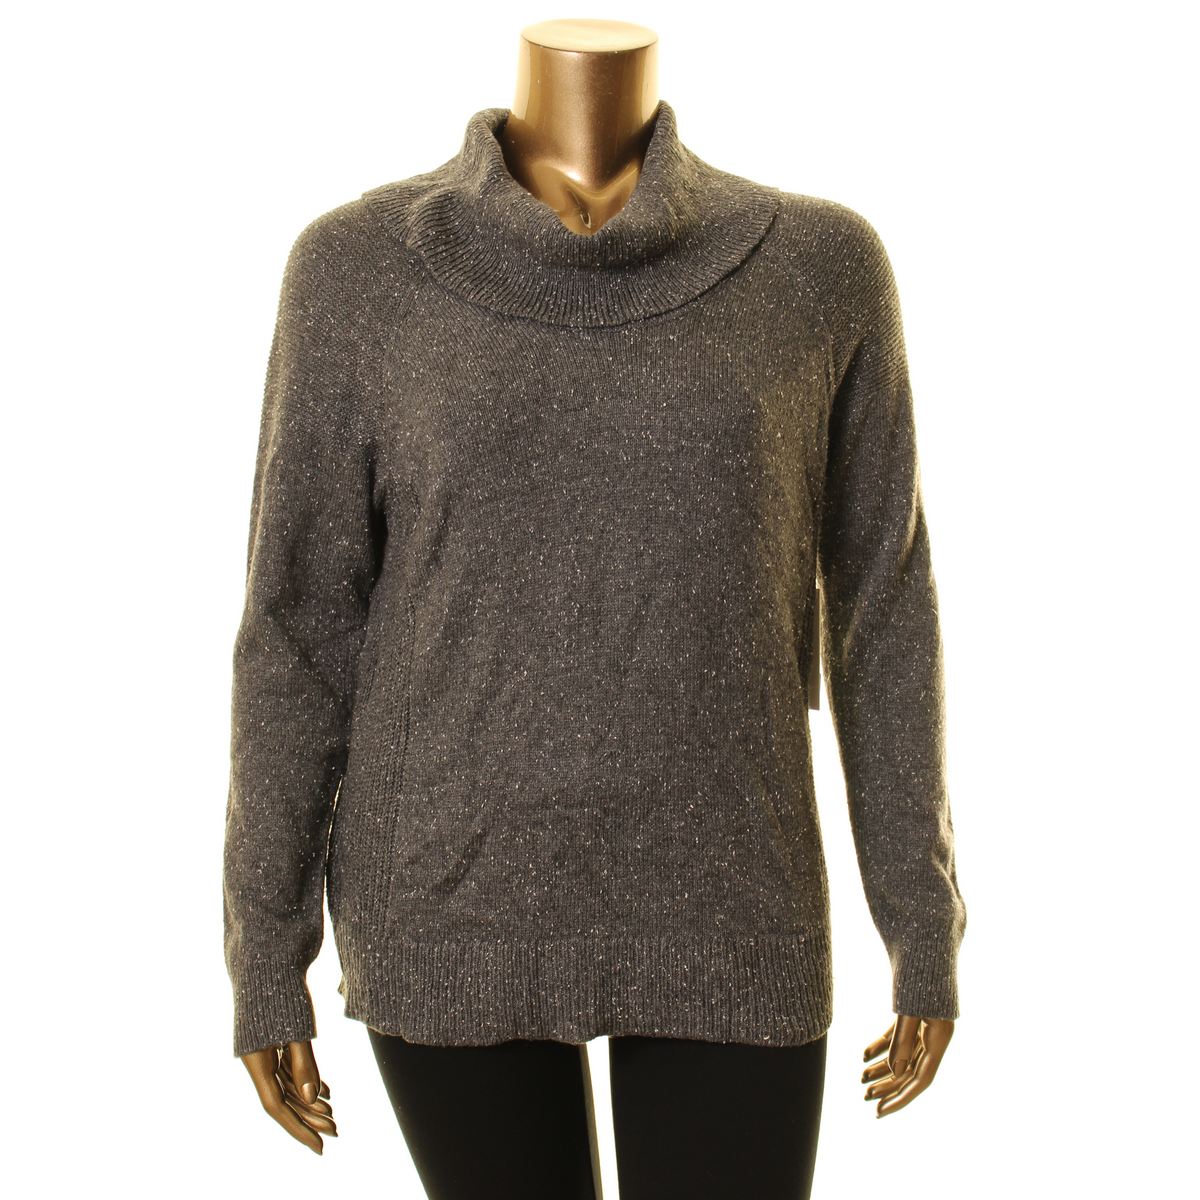 CALVIN KLEIN NEW Women's Mix Stitched Flecked Cowl Neck Sweater Top ...